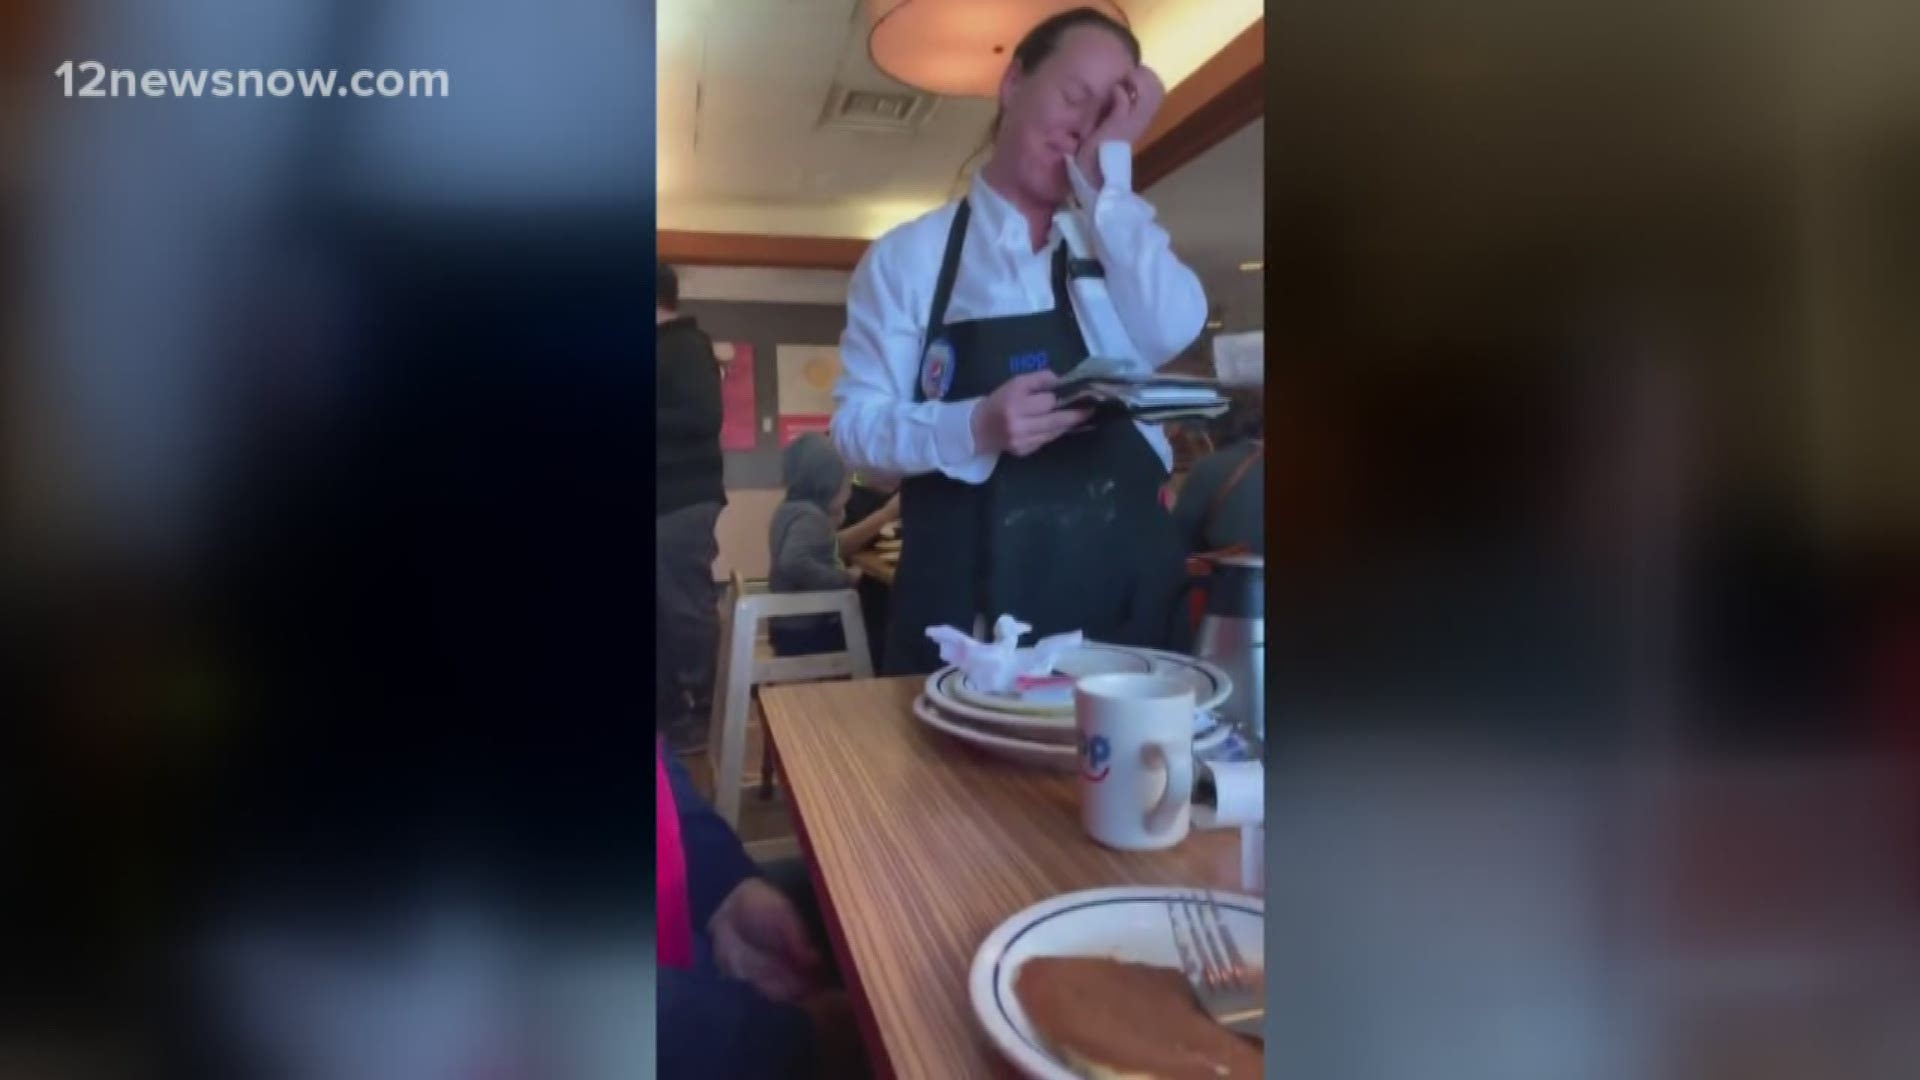 Five people came together to surprise a waitress for the holidays.